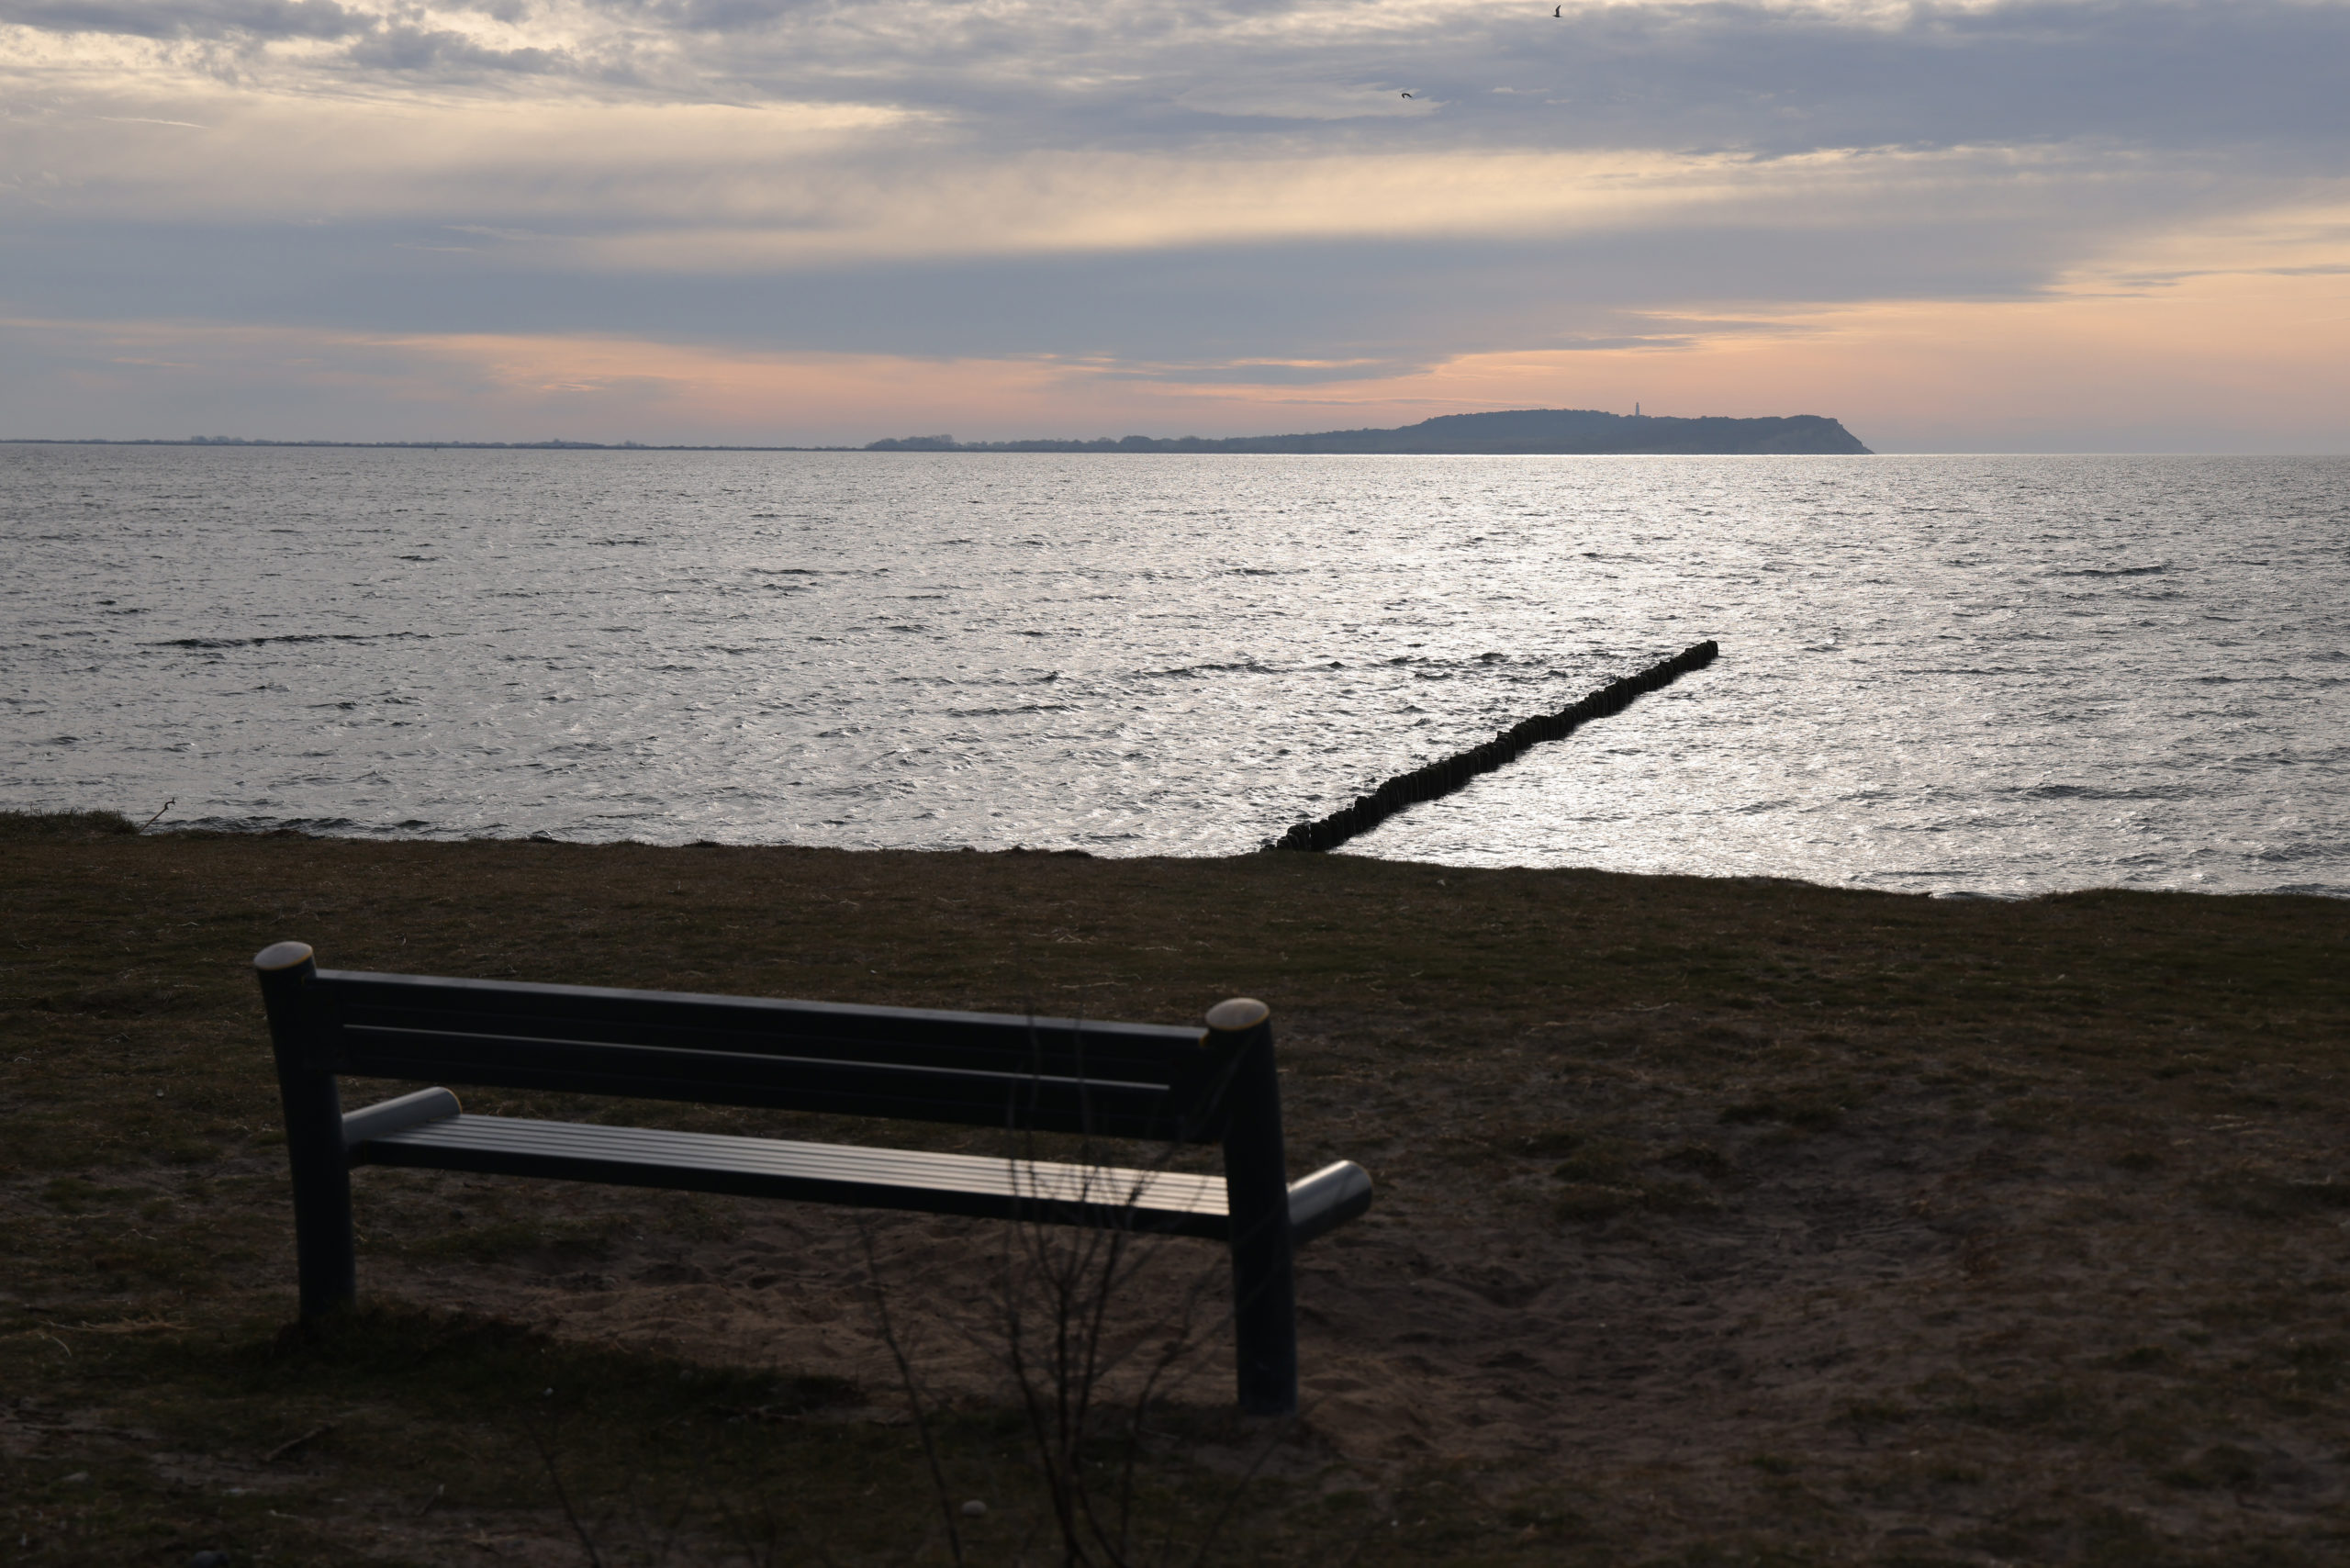 DRANSKE, GERMANY - MARCH 17: A bench looks out towards the Baltic Sea on Ruegen Island on March 17, 2023 near Dranske, Germany. According to media reports, German investigators suspect the Andromeda, a 50-foot Bavaria 50 Cruiser recreational sailing yacht, was used by a six-person crew to sail from Rostock with a stop over on Ruegen at nearby Wiek out to the Baltic Sea and plant explosives that detonated on the Nord Stream pipeline in September of 2022, causing extensive damage. Investigators reportedly found traces of explosives on the table inside the yacht. While initial findings point to a possible Ukrainian connection to the sabotage operation, many questions remain open. The Andromeda is currently in dry dock on the nearby headland of Bug. 